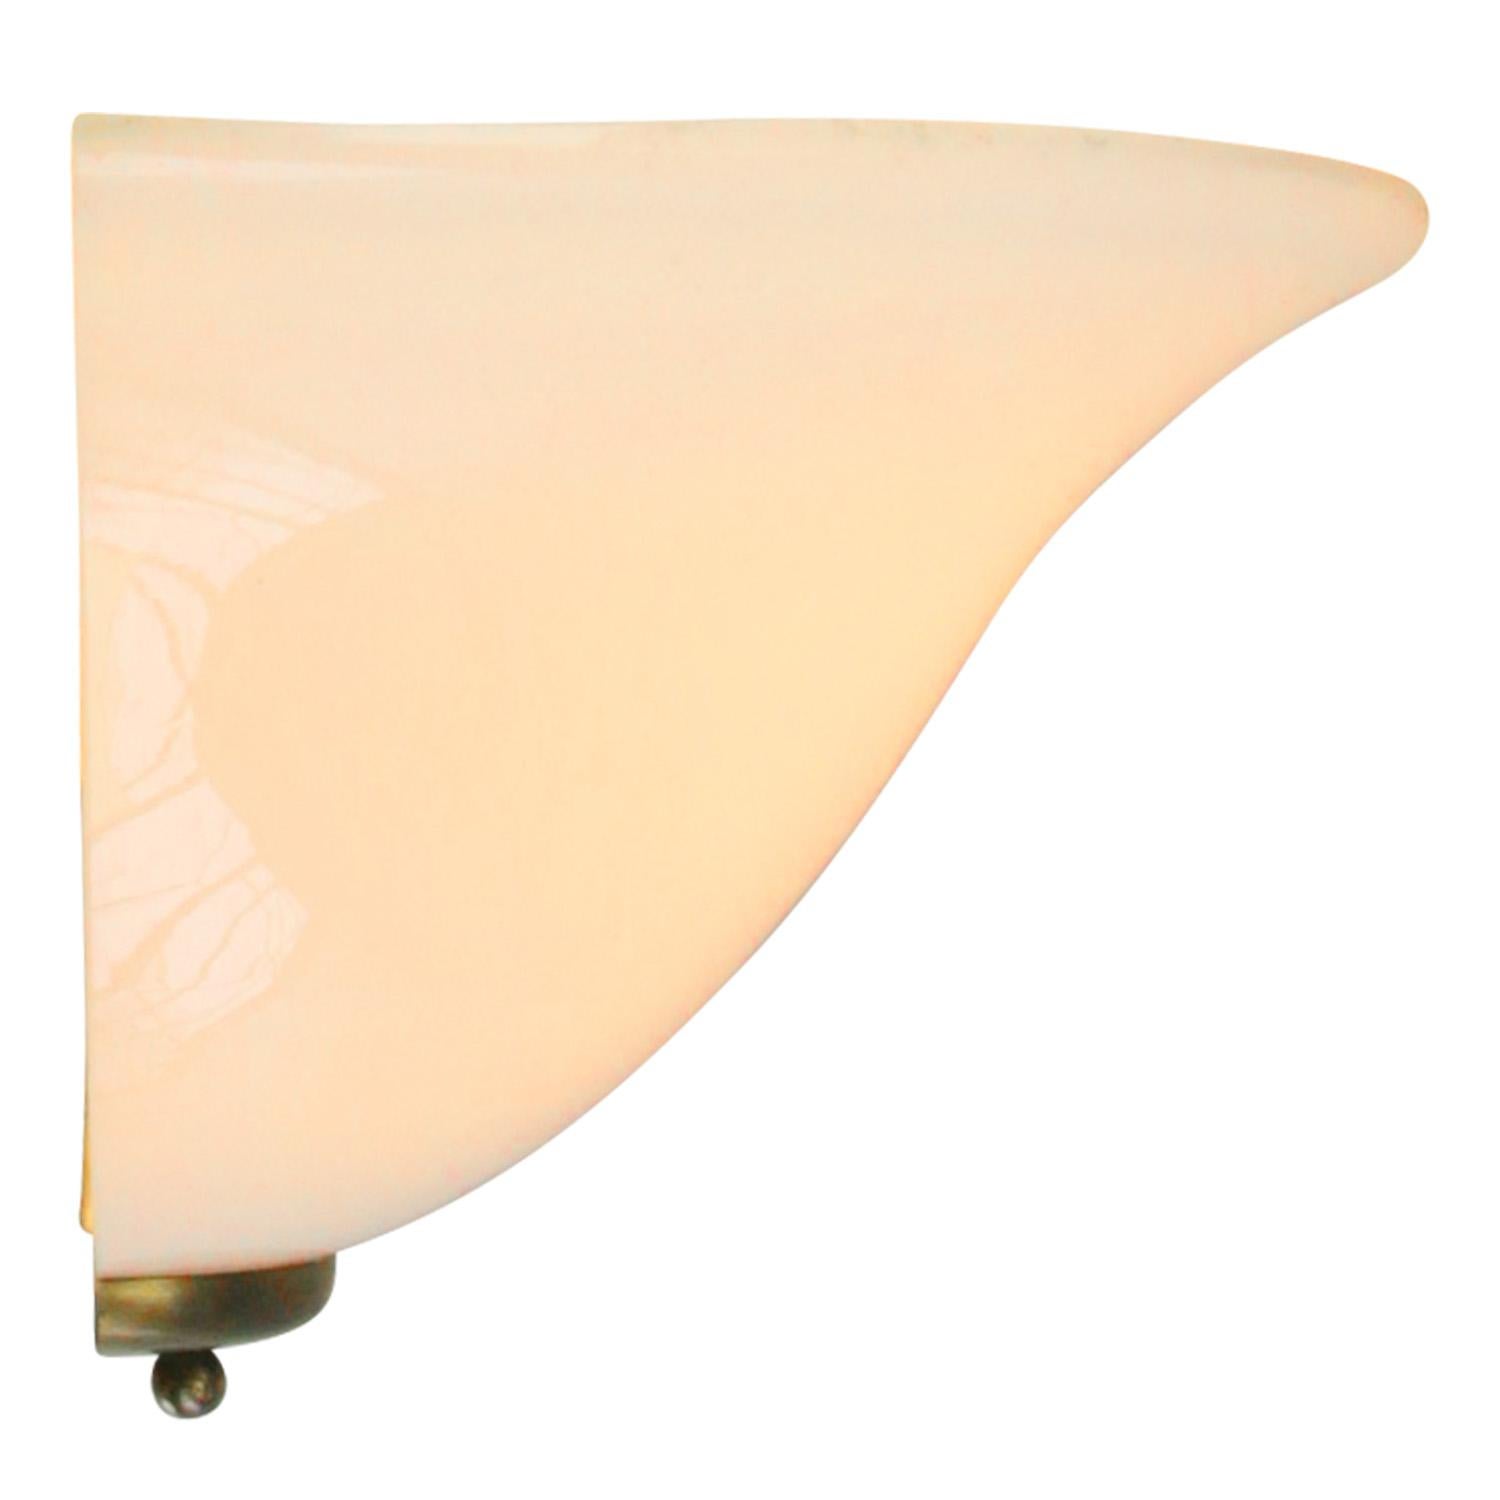 Opaline scone wall lamp.
Brass with white opaline glass.

Weight: 0.65 kg / 1.45 lb

Priced per individual item. All lamps have been made suitable by international standards for incandescent light bulbs, energy-efficient and LED bulbs. The new